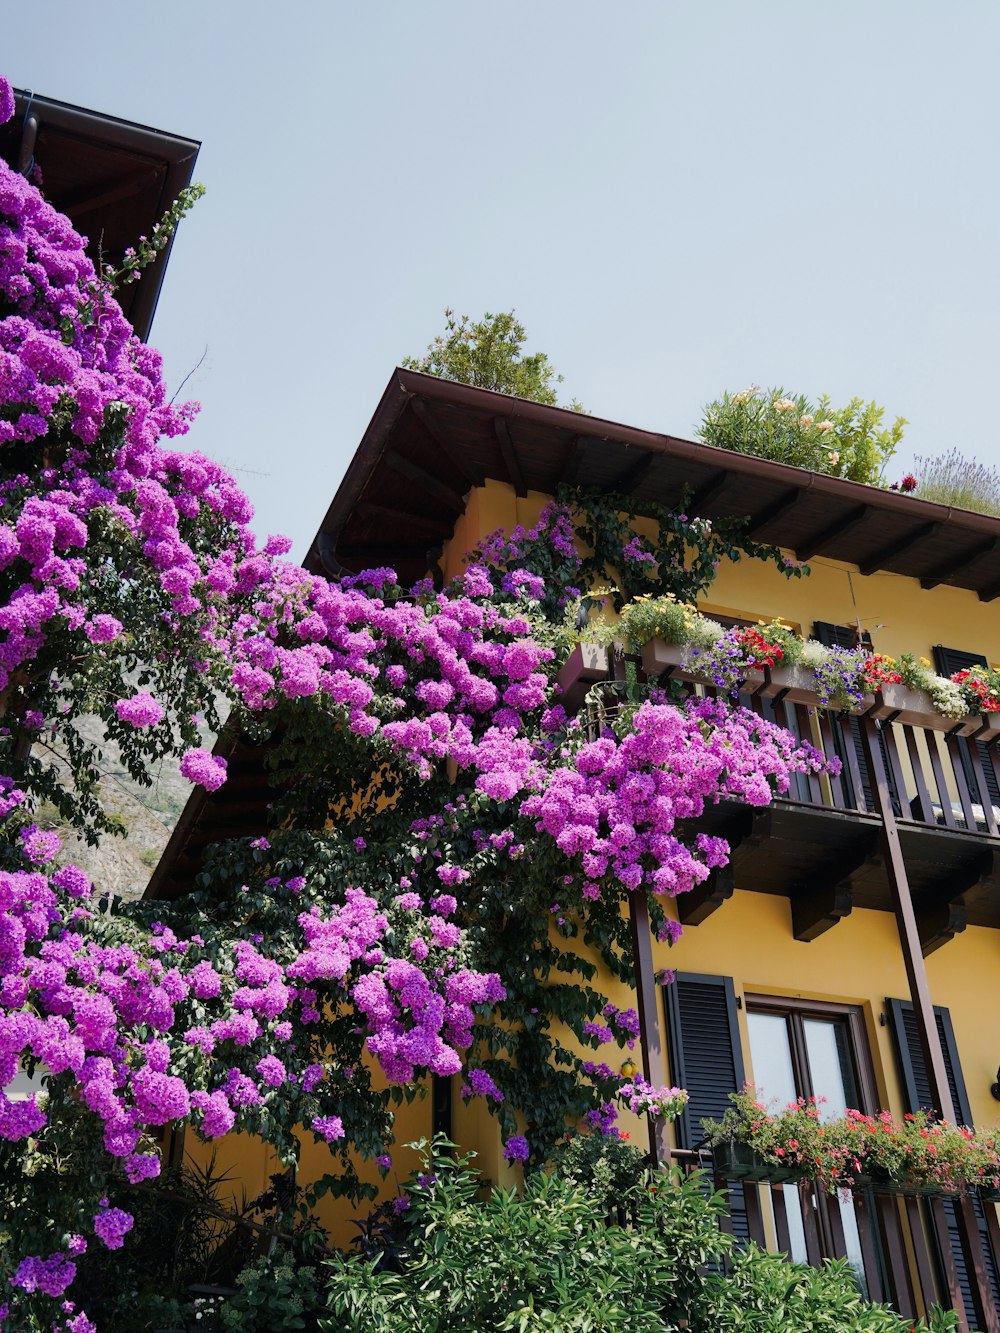 a yellow building with purple flowers growing on it